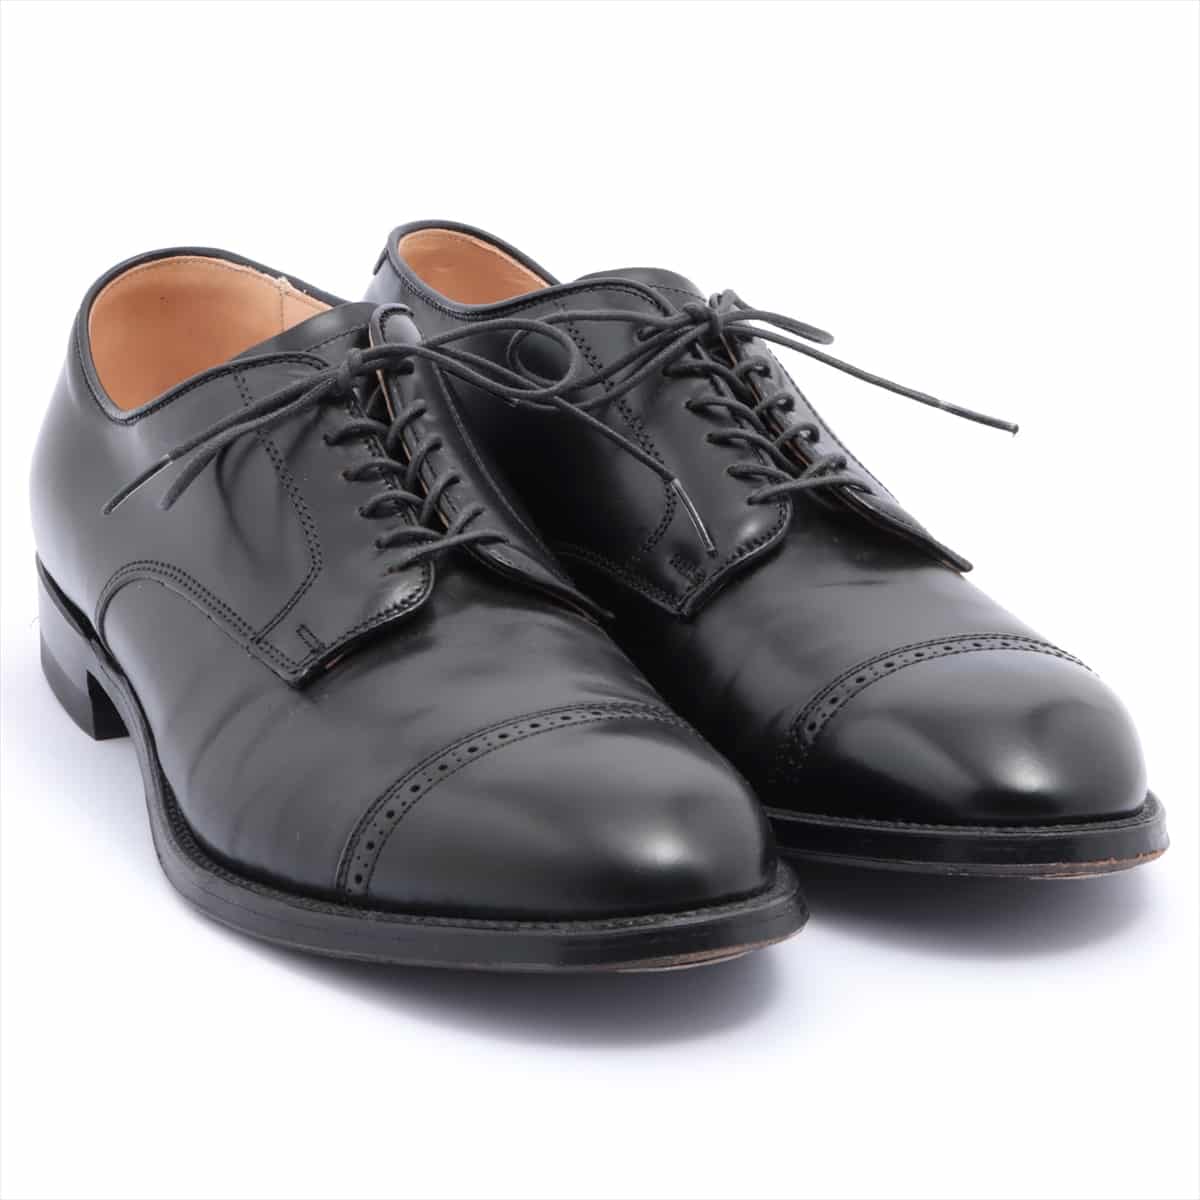 Alden Cordovan Leather shoes 10 1/2 Men's Black punched cap toe 56251 With genuine shoe tree